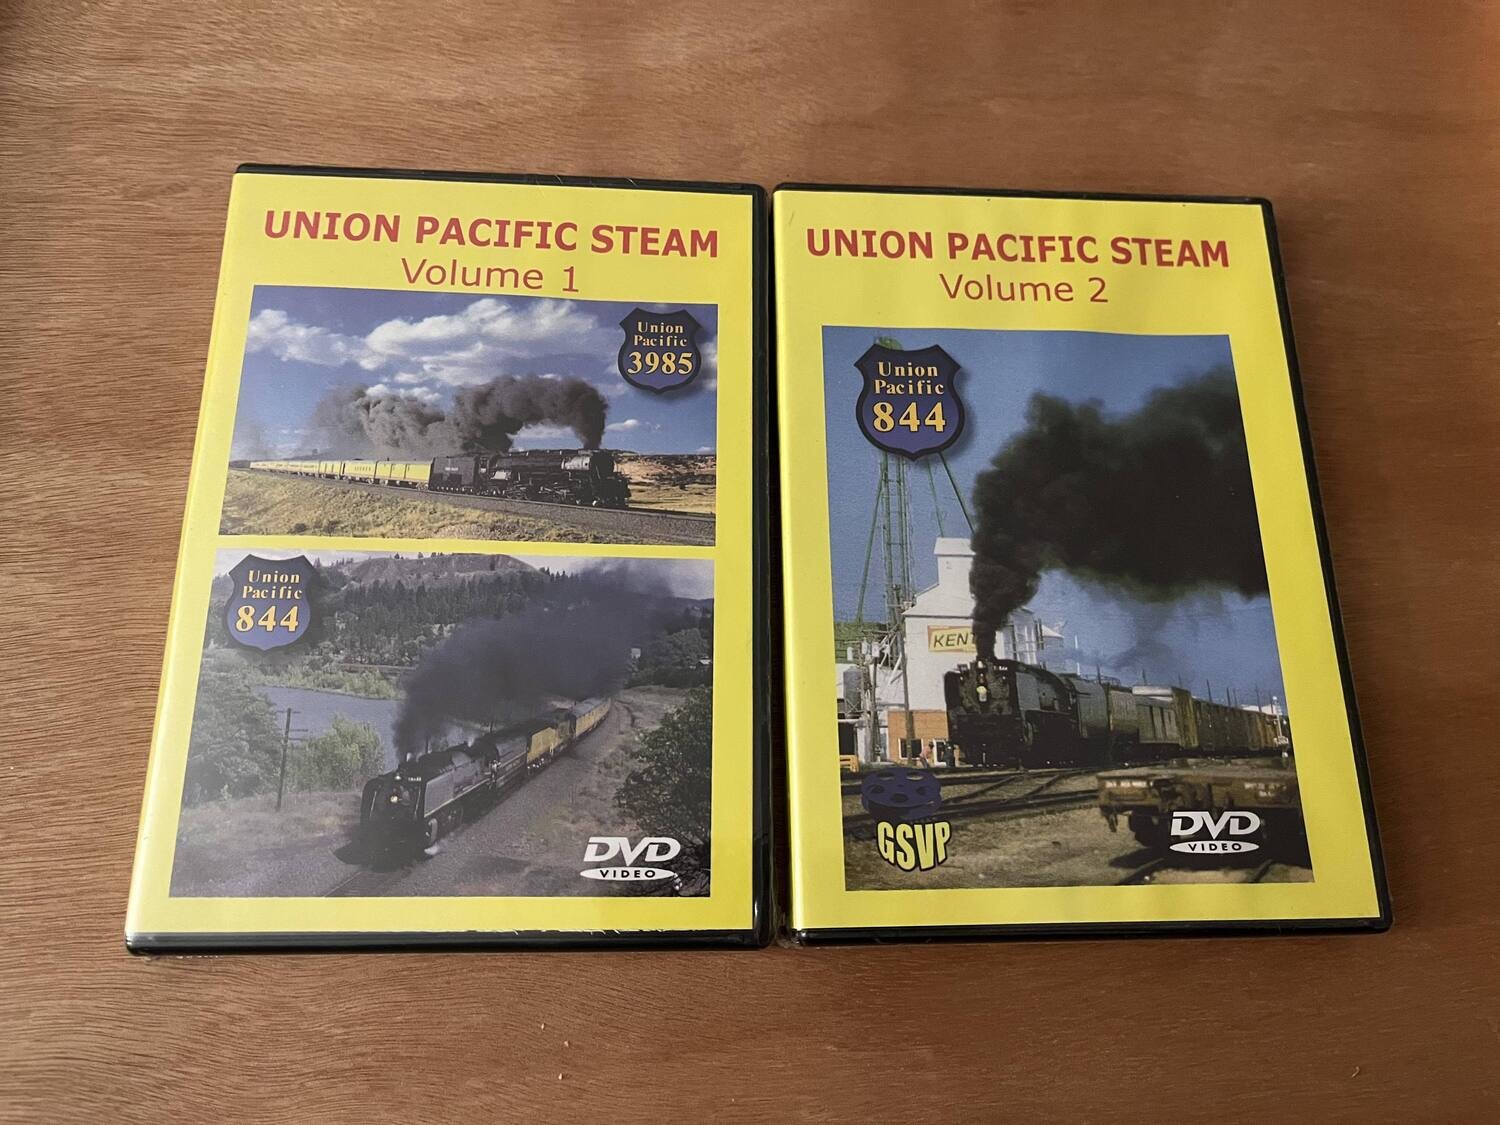 Union Pacific Steam - Volume 1 and 2 Combo